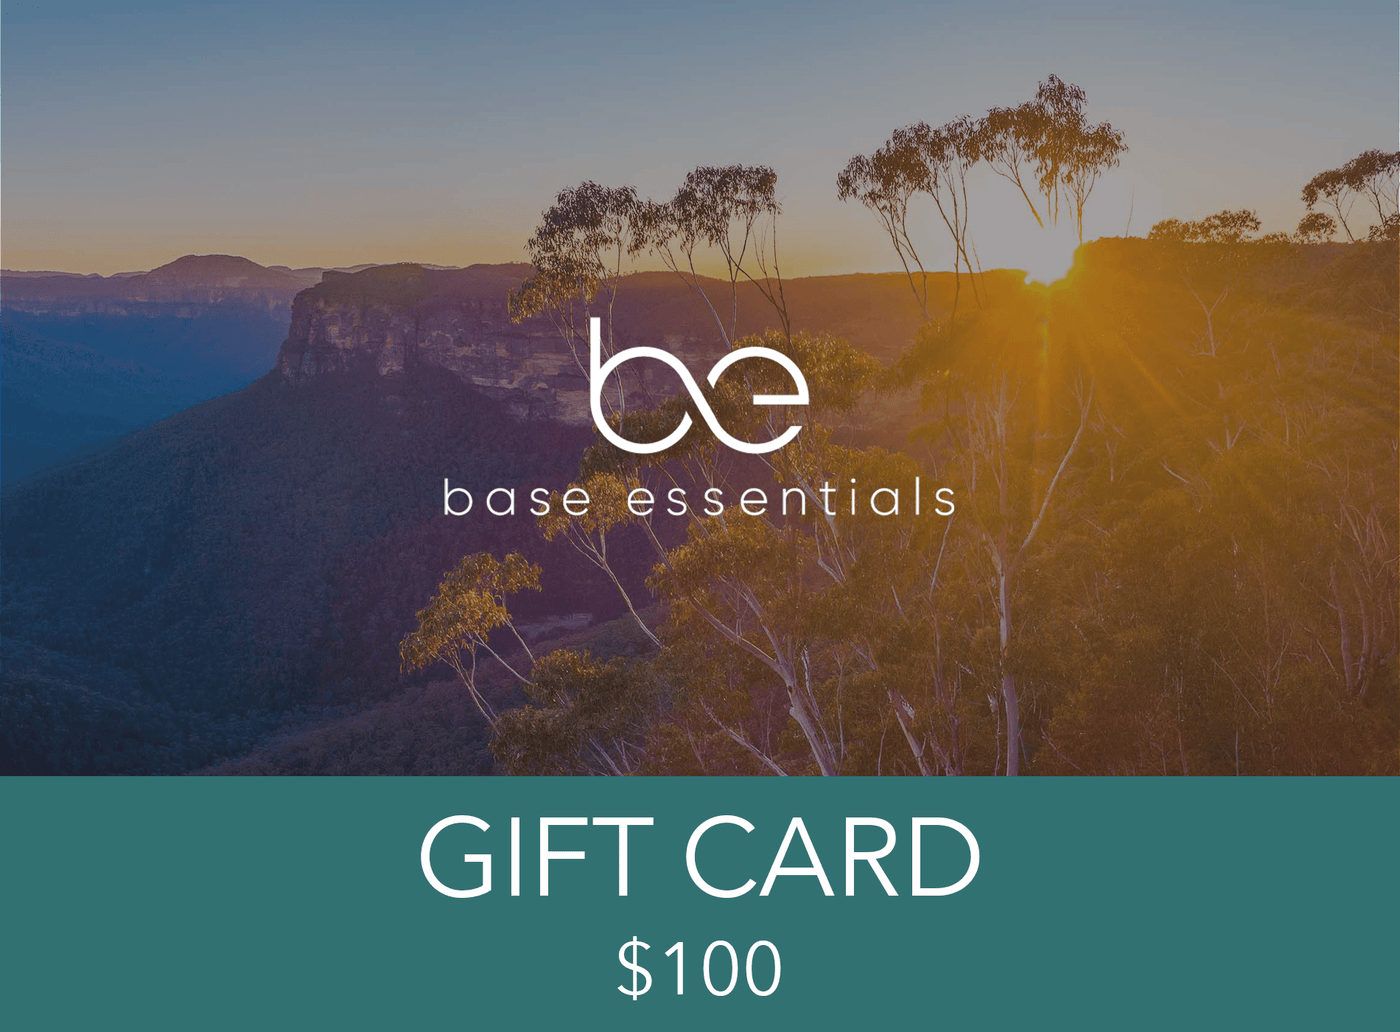 Base Essentials Gift Cards A$100.00 Base Essentials Gift Card